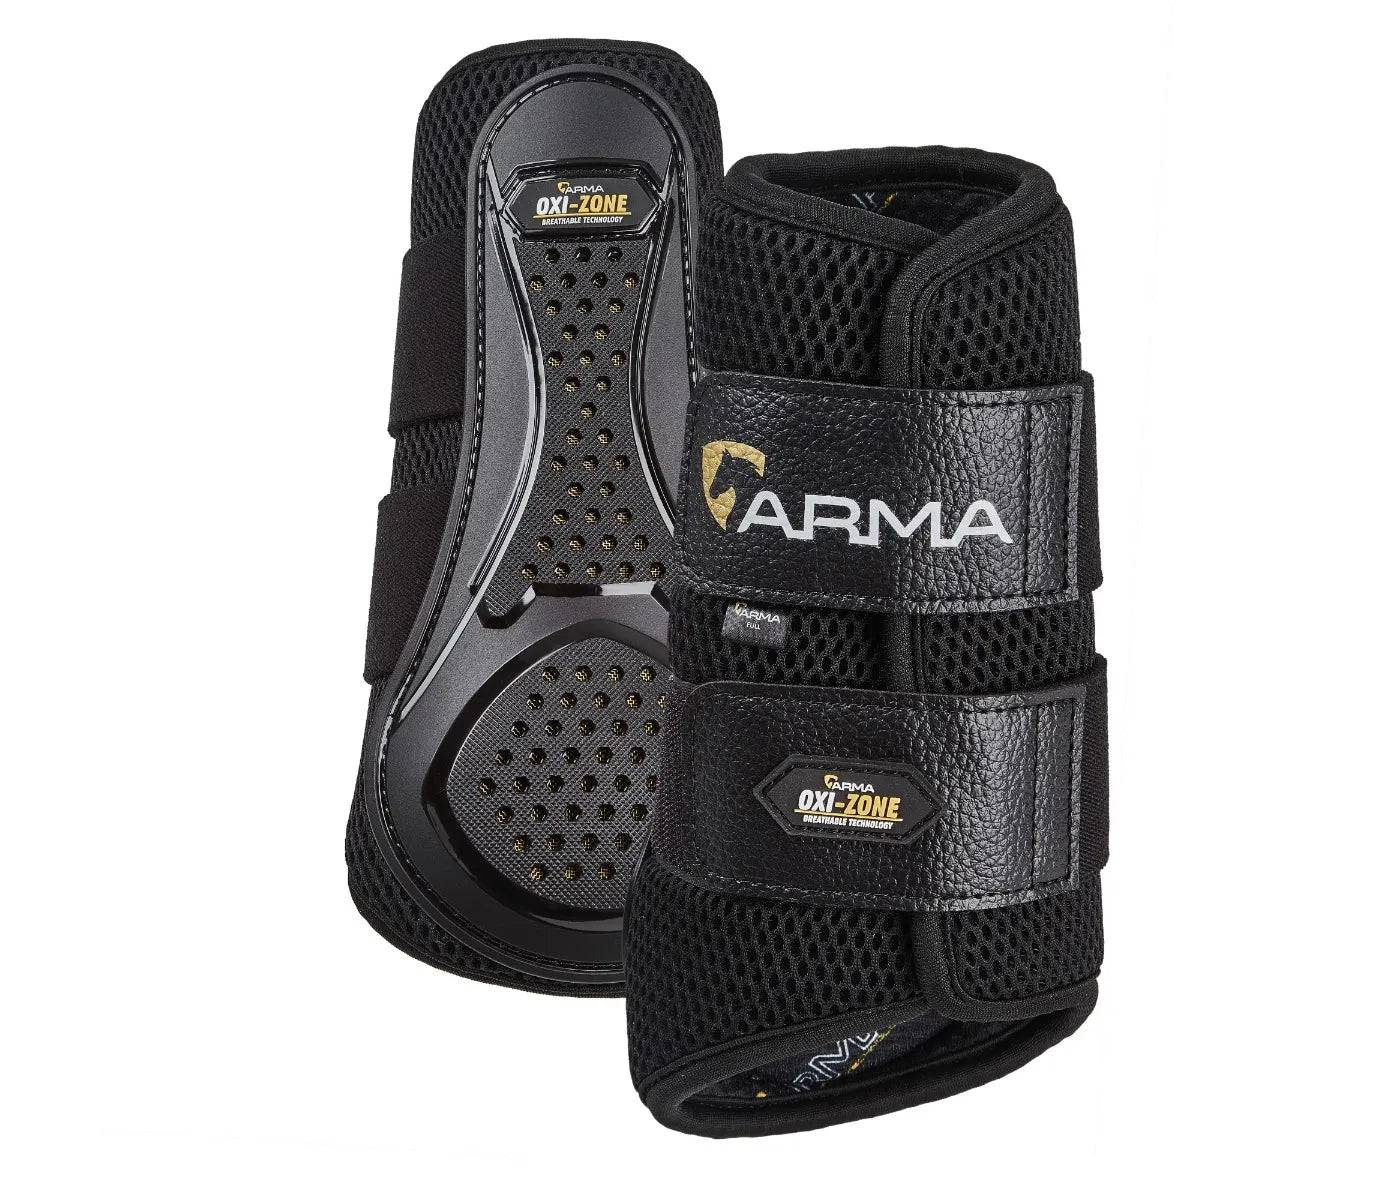 Arma Oxi-Zone Carbon Brushing Boots - pr